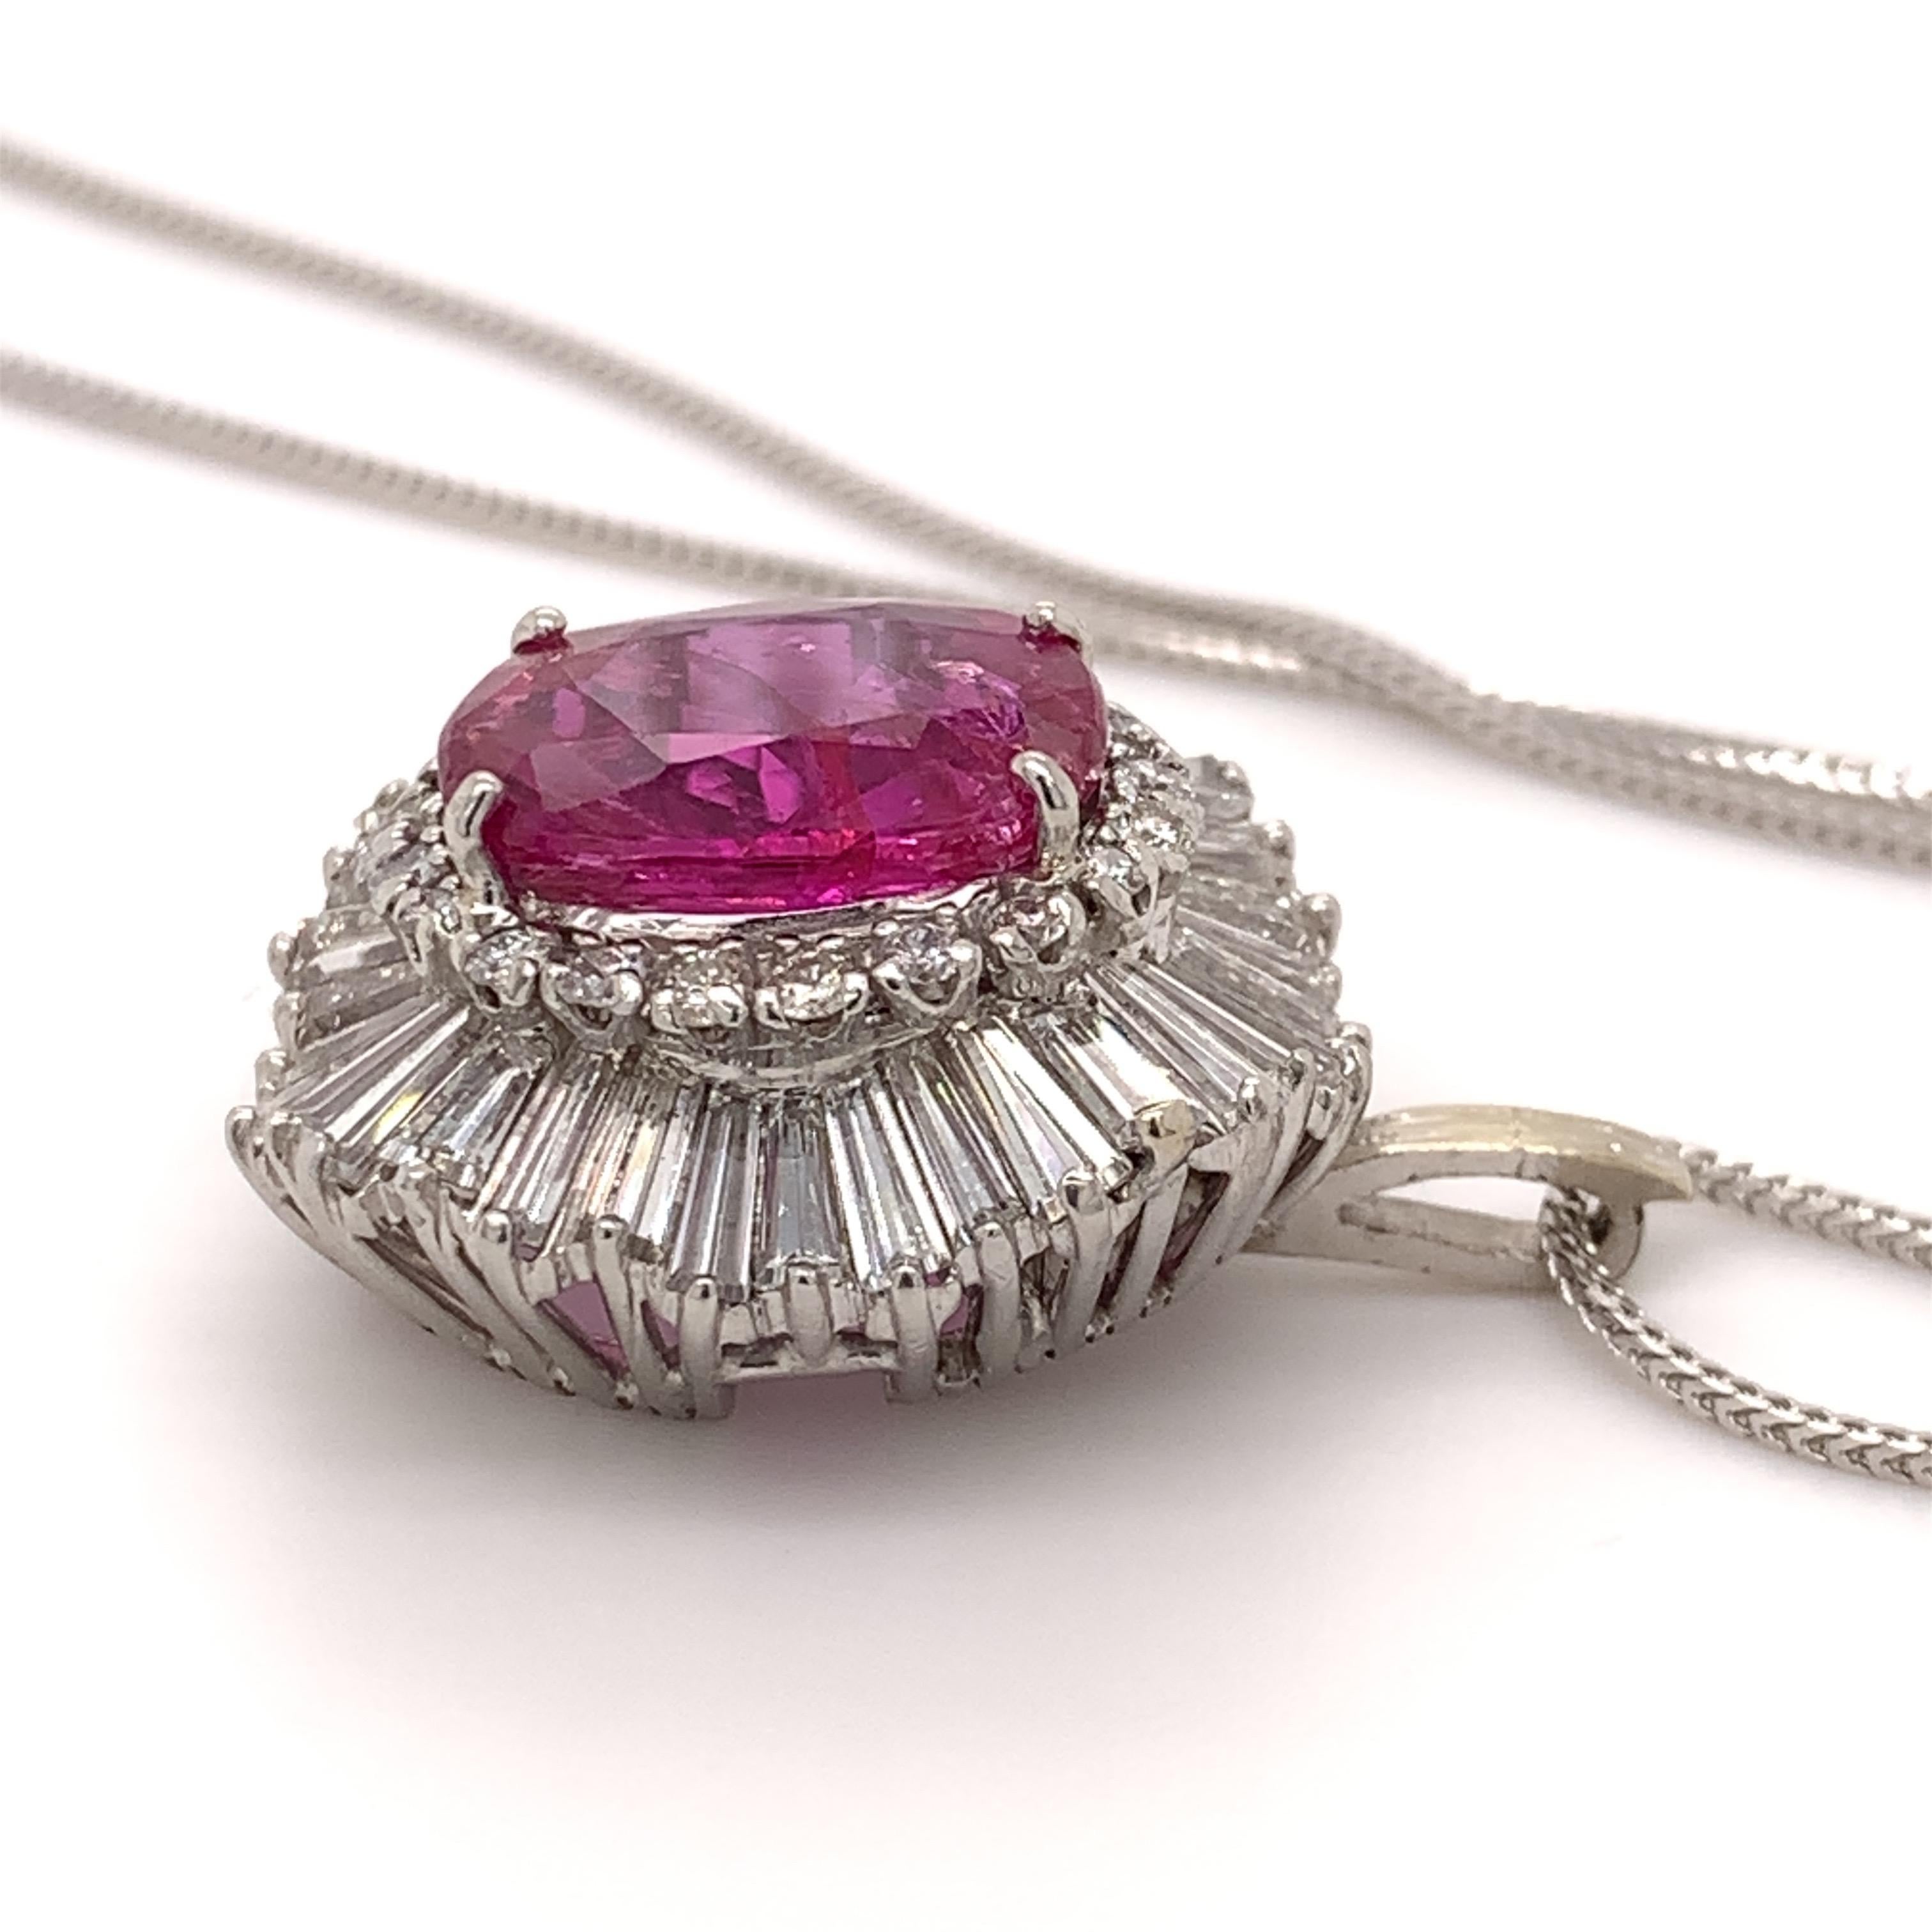 Collectible unheated ruby pendant. Lively pinkish-red tone, high brilliance, oval faceted unheated 7.47 carats ruby mounted in high profile with four bead prongs, accented with a tapered baguette diamond and round brilliant cut diamonds. Handcrafted